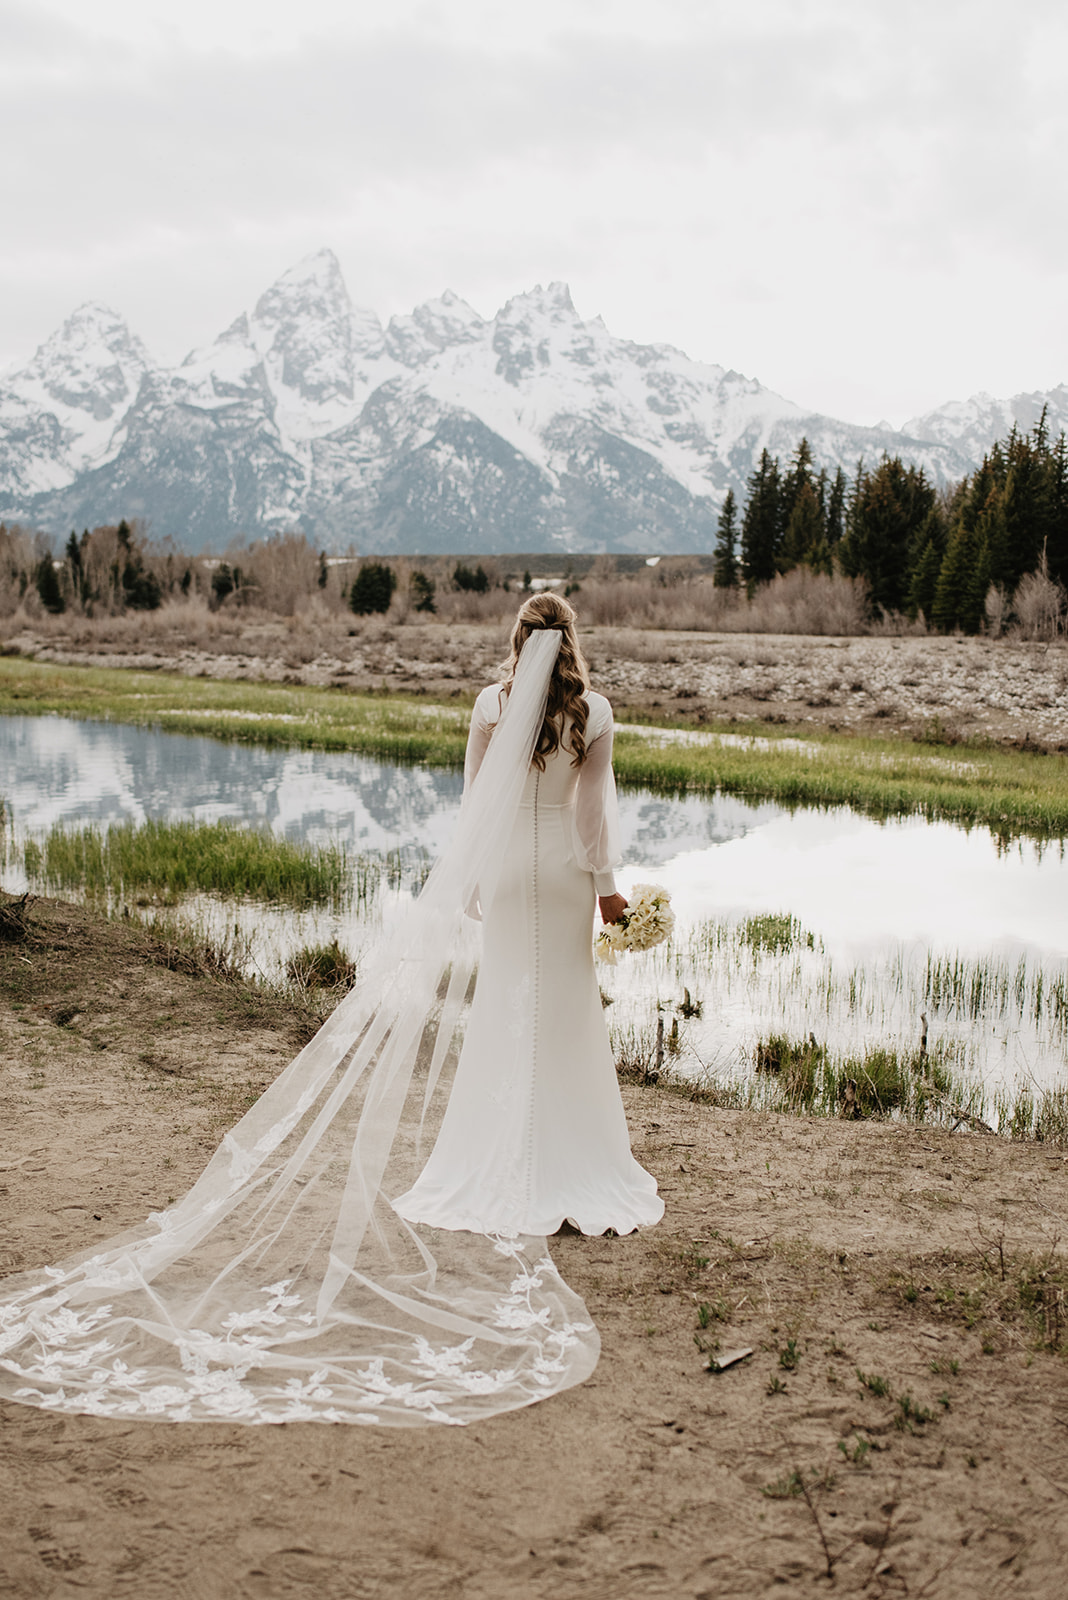 Jackson Hole bride photo ideas with bride facing away from the camera towards the mountains as her veil blows in the wind